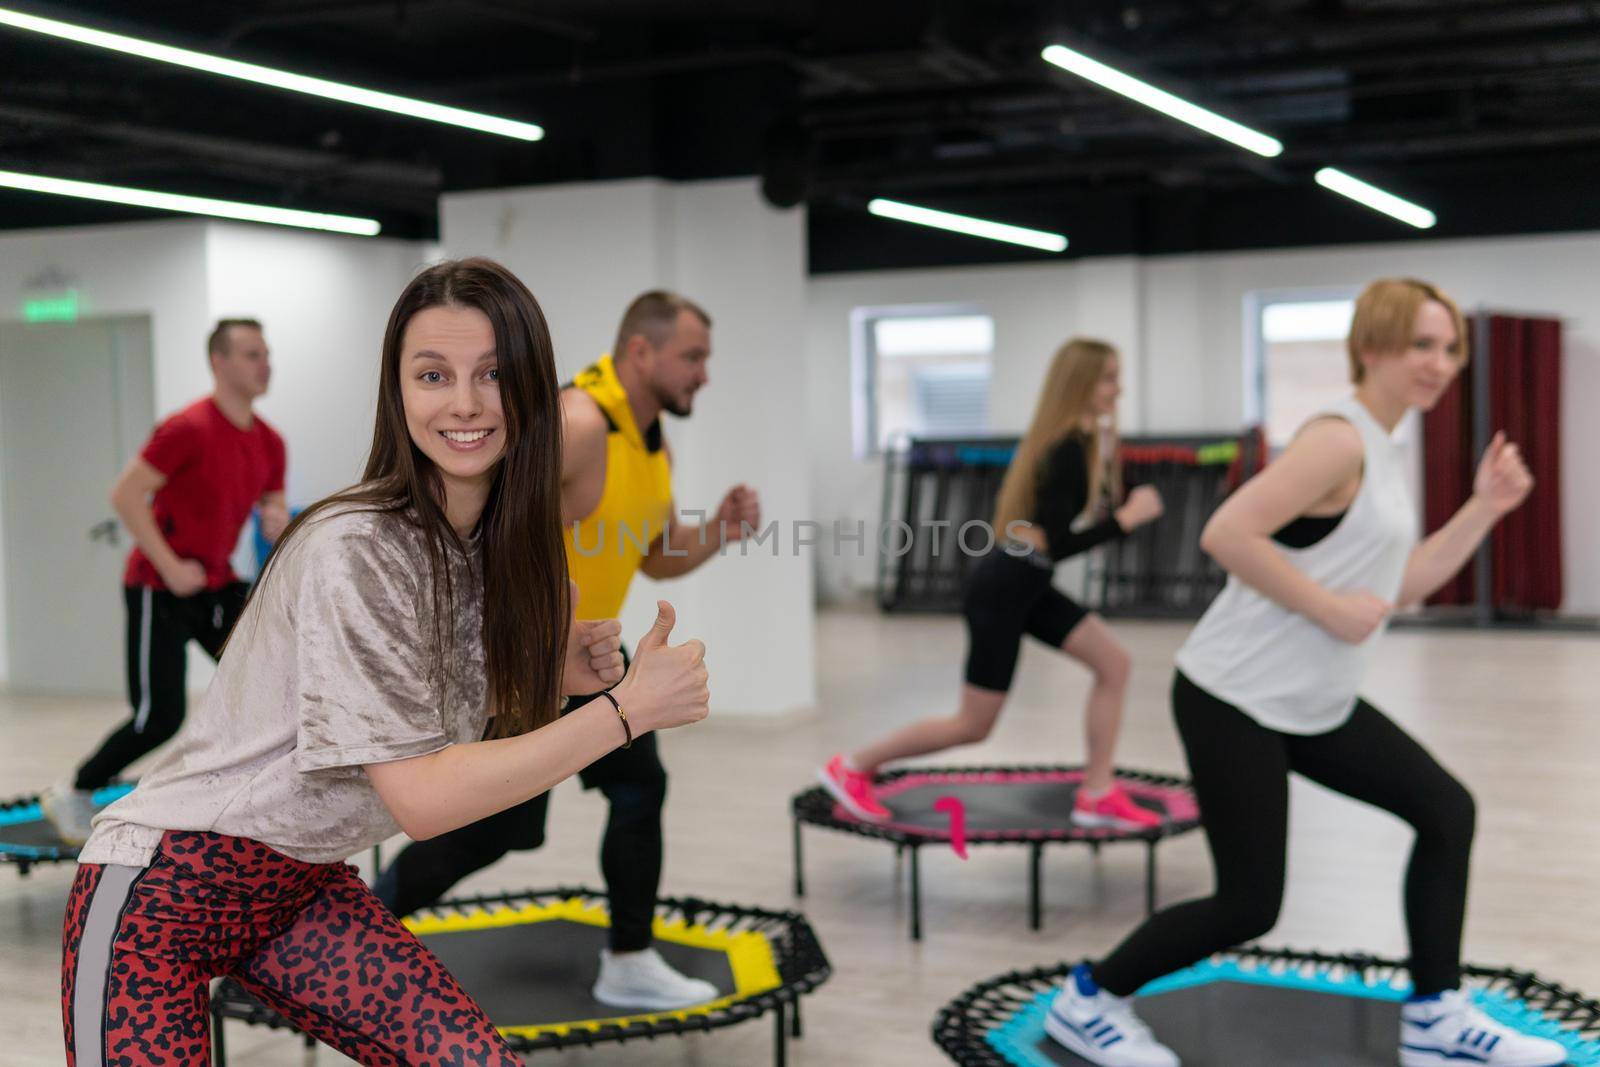 Women's and men's group on a sports trampoline, fitness training, healthy life - a concept trampoline group batut instructor men, for lifestyle athletic from fitness from young body, sportive sportswear. Many bodycare athlete, aerobic